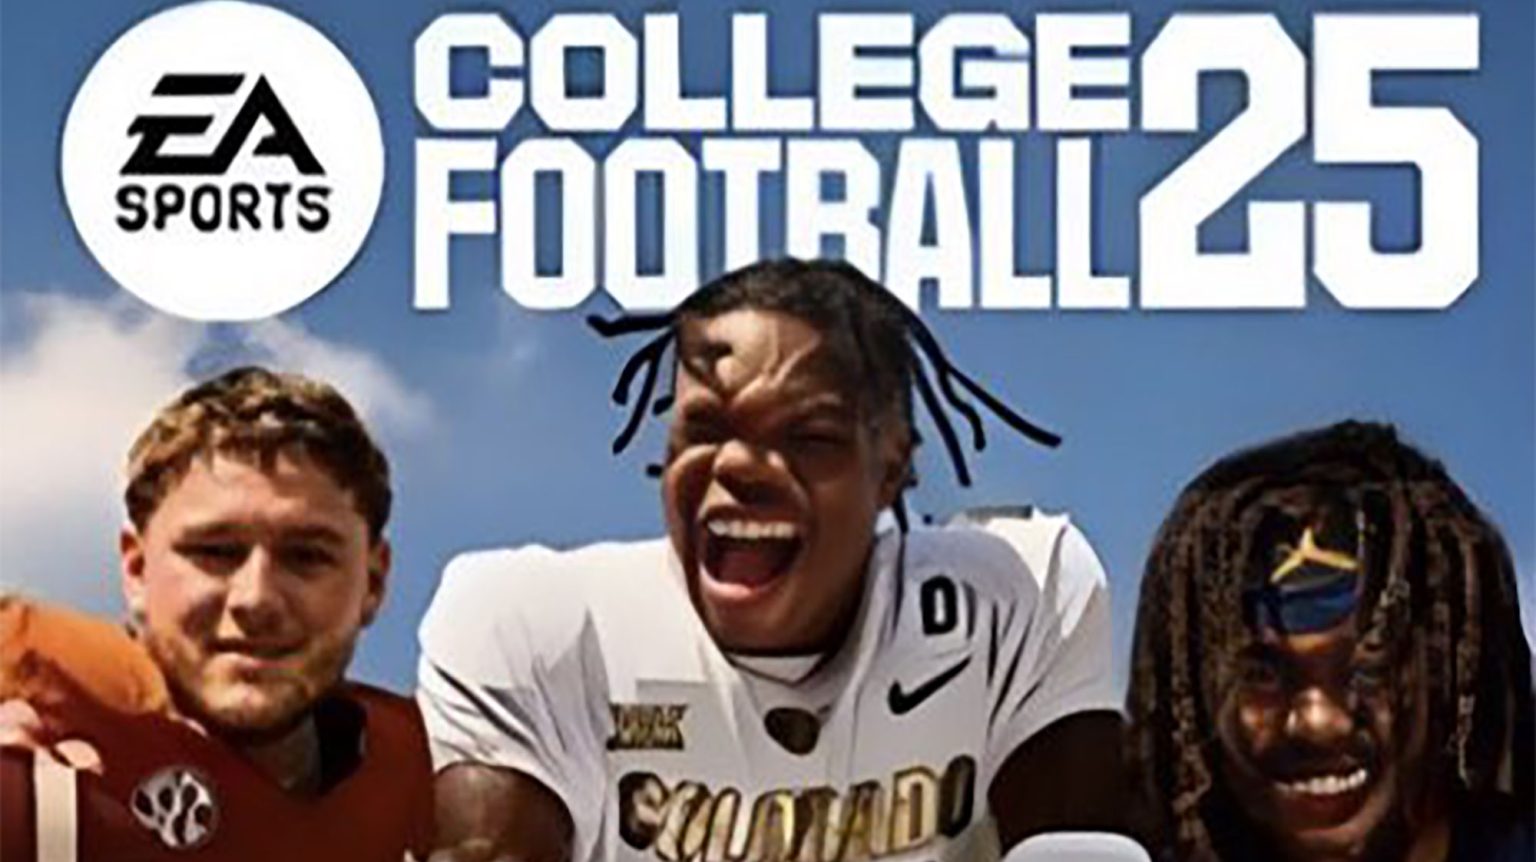 EA Sports Unveils Covers and Release Date for College Football 25 Video Game - Check them out now!